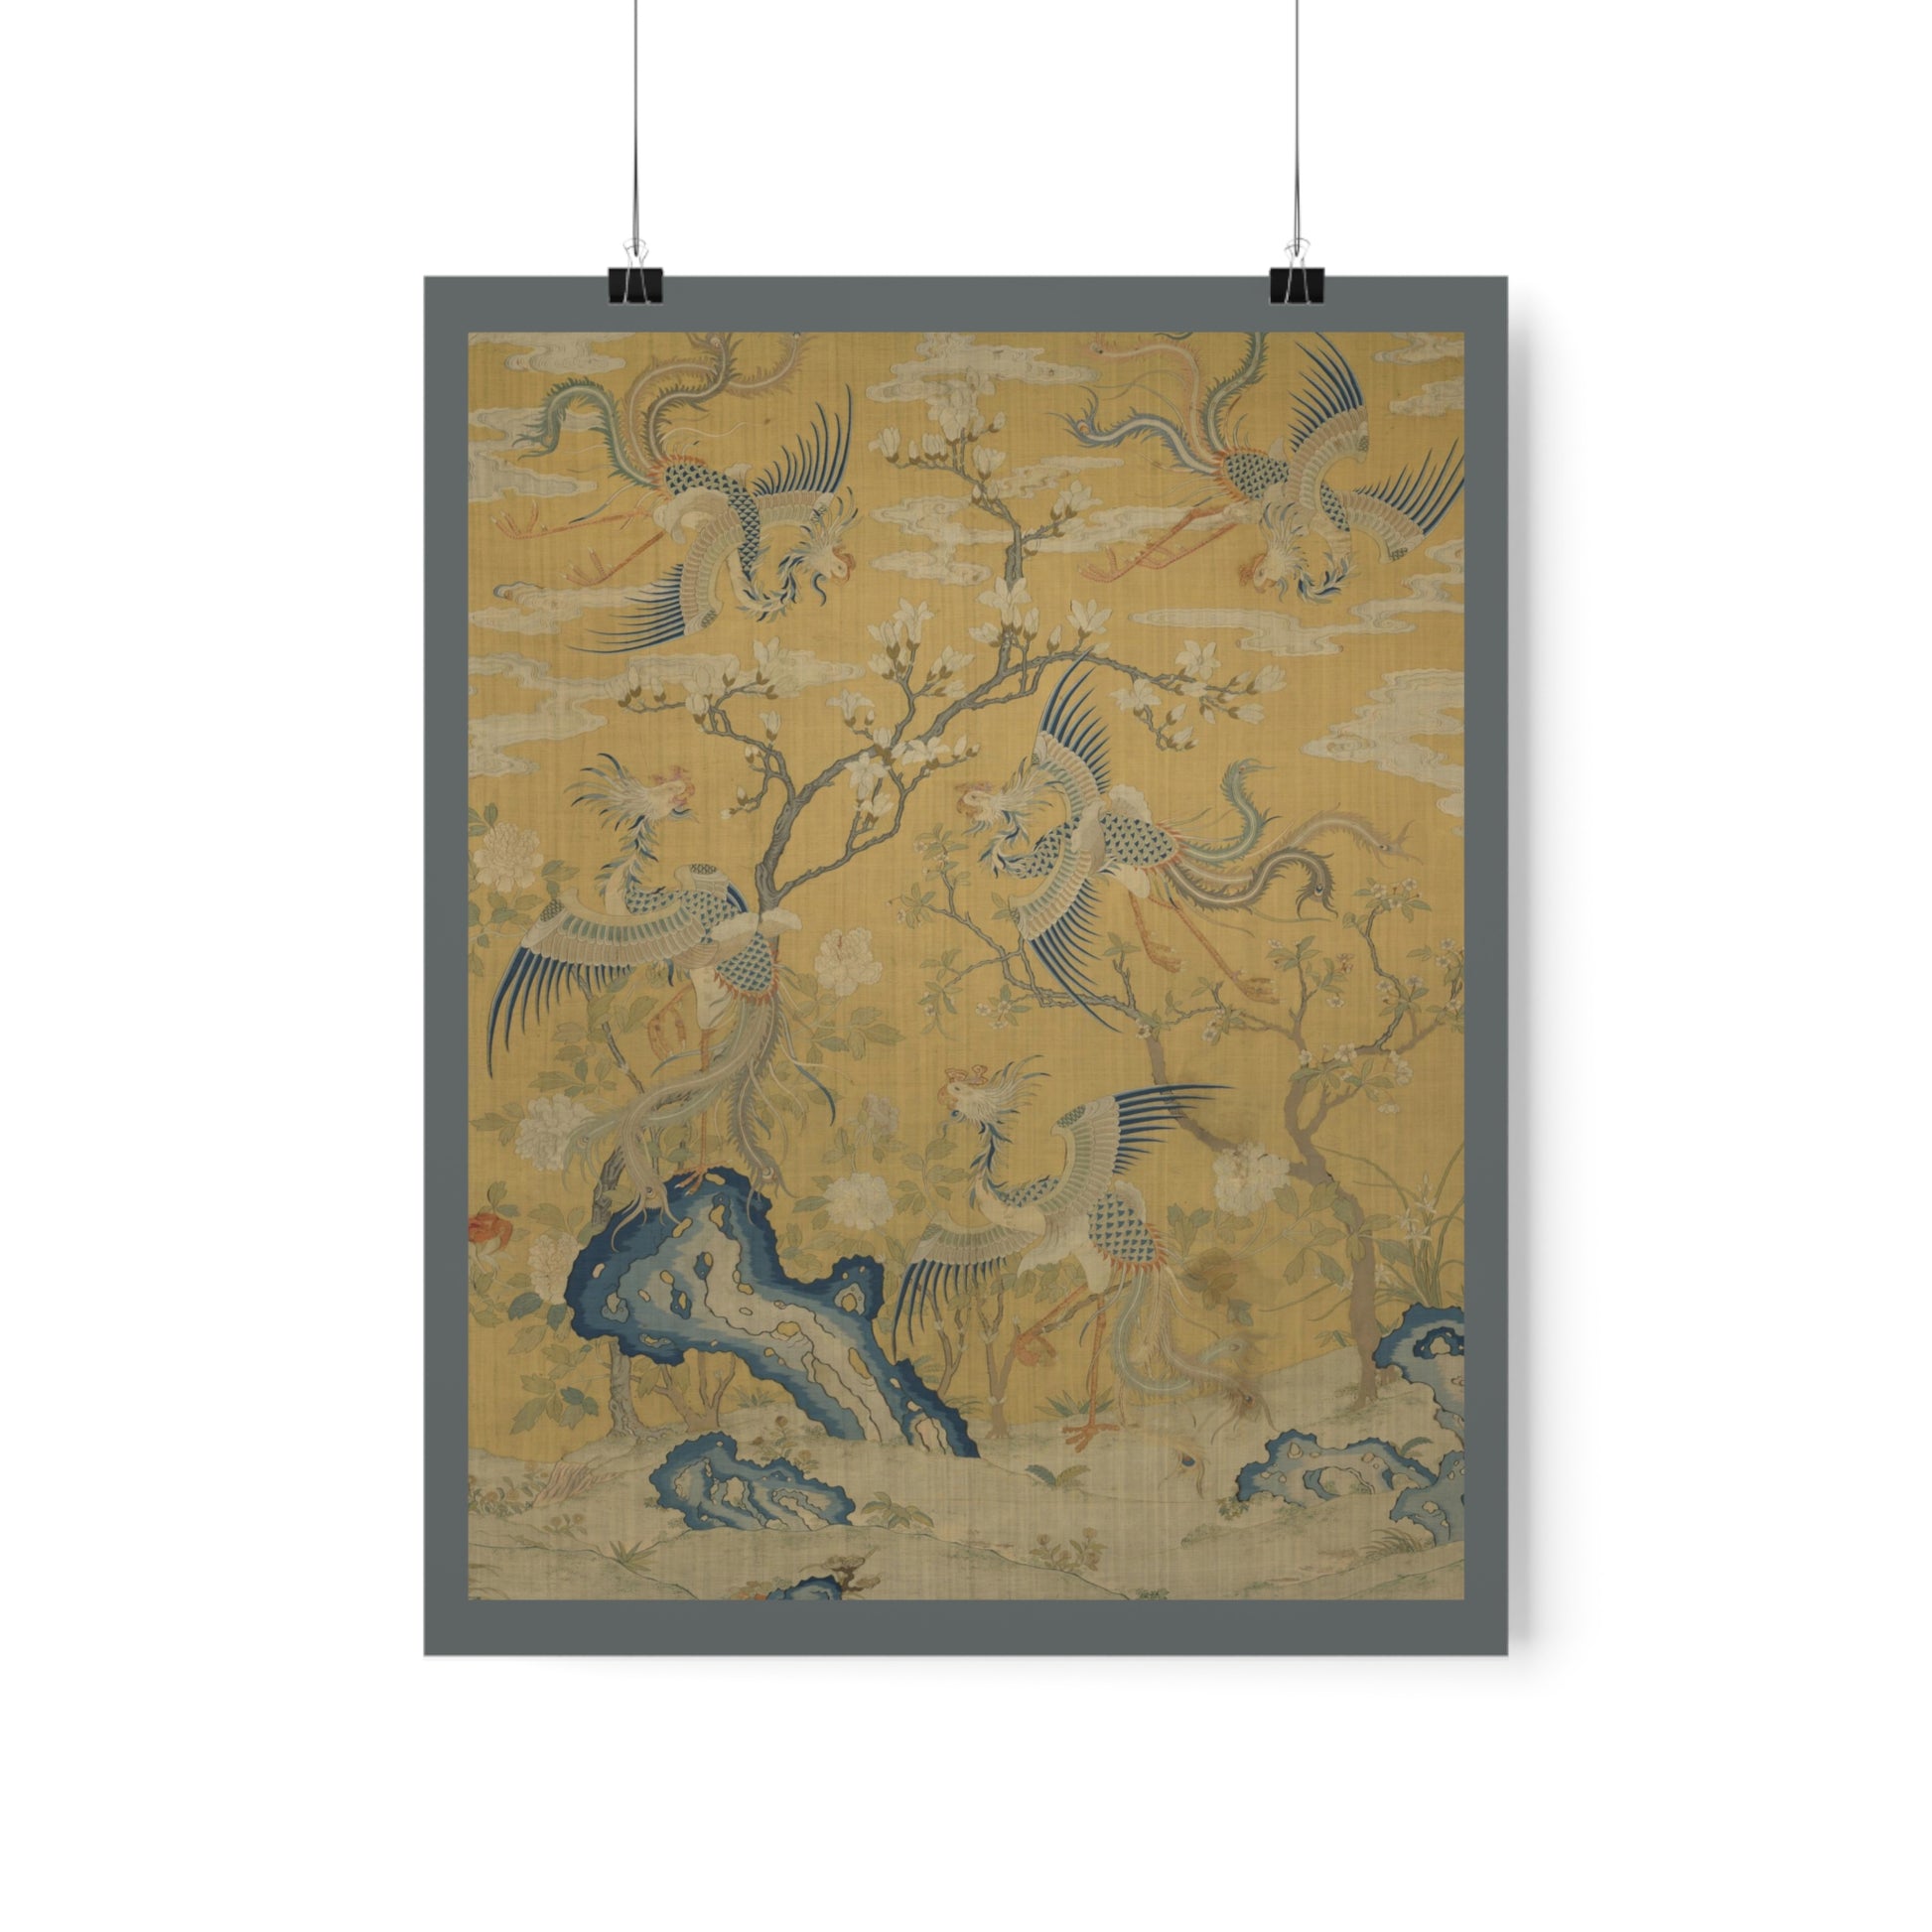 Large pictorial silk tapestries such as these were woven mostly in the imperial workshops in Suzhou, a textile center in southeast China. The background of bright yellow, a color exclusive to the emperor, further confirms the imperial origins. Five fenghuang birds, often translated as phoenixes. 